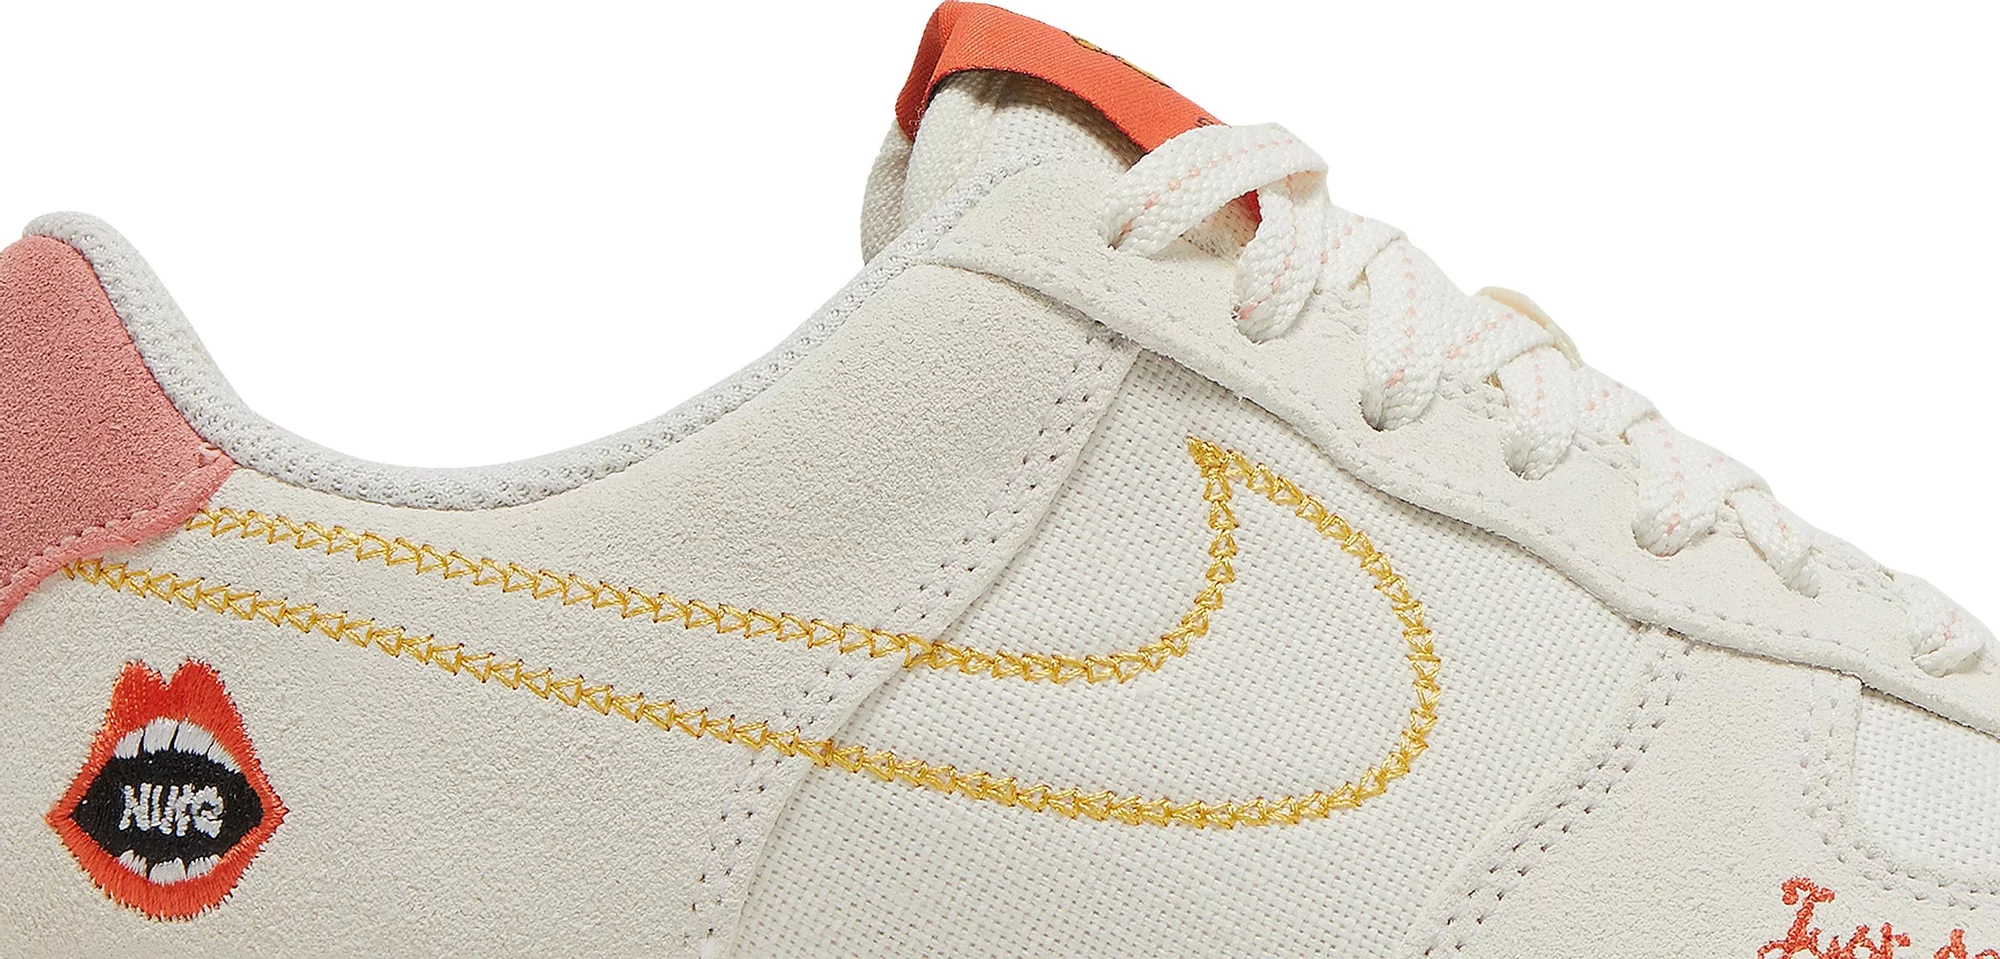 Antología apetito manejo Summer 2022 Style Guide: Nike Air Force 1s